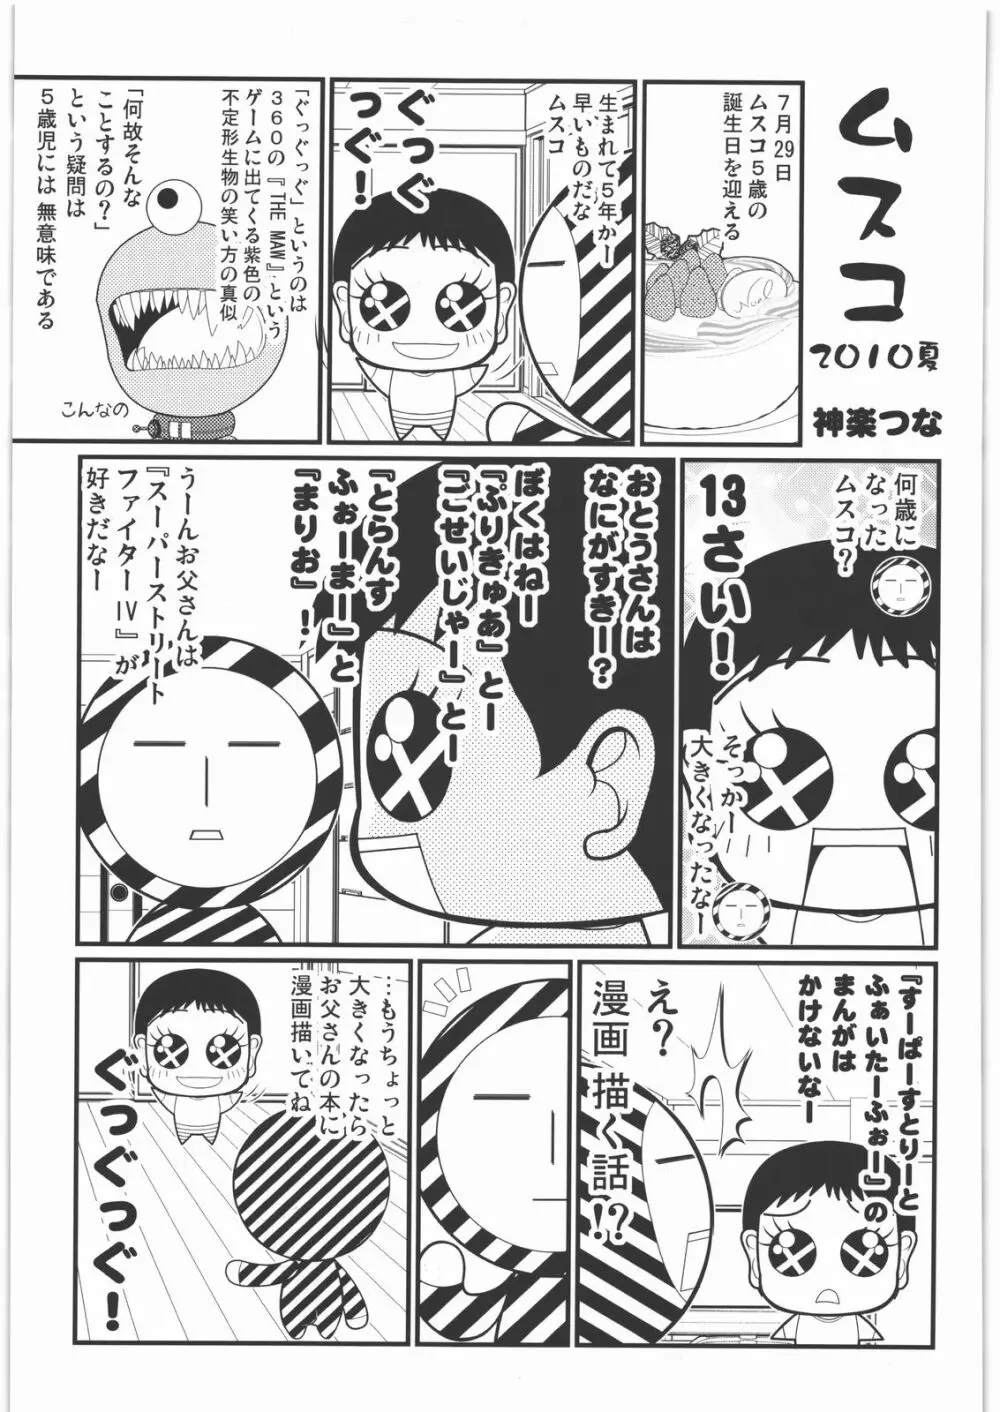 甲冑通信 弐之號 Page.26